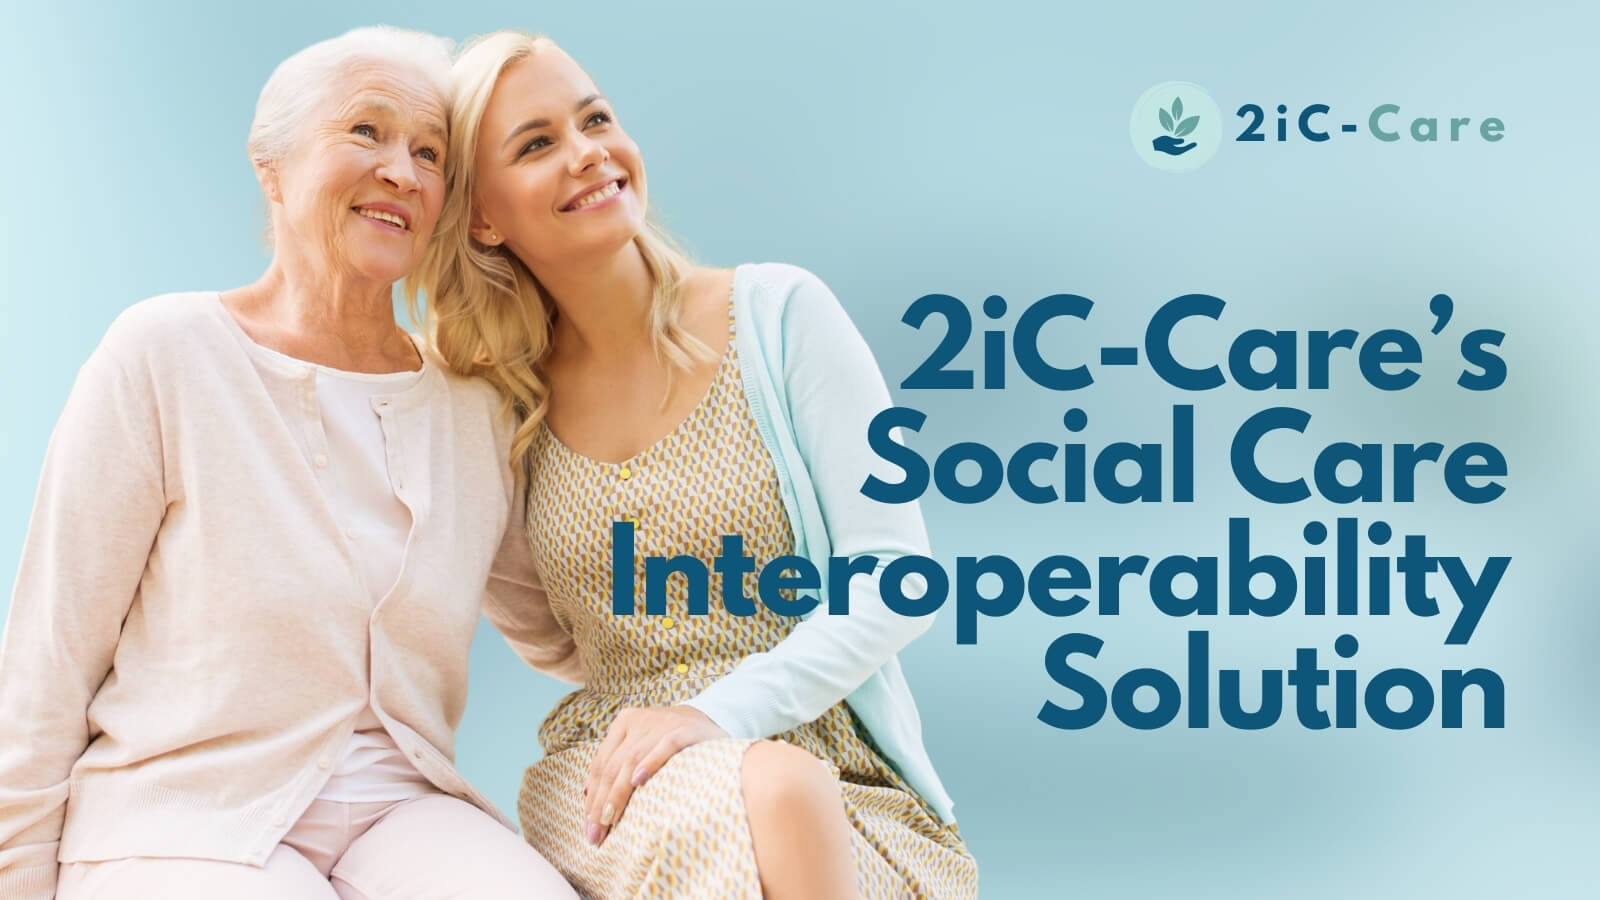 2iC-Care’s Social Care Interoperability Solution